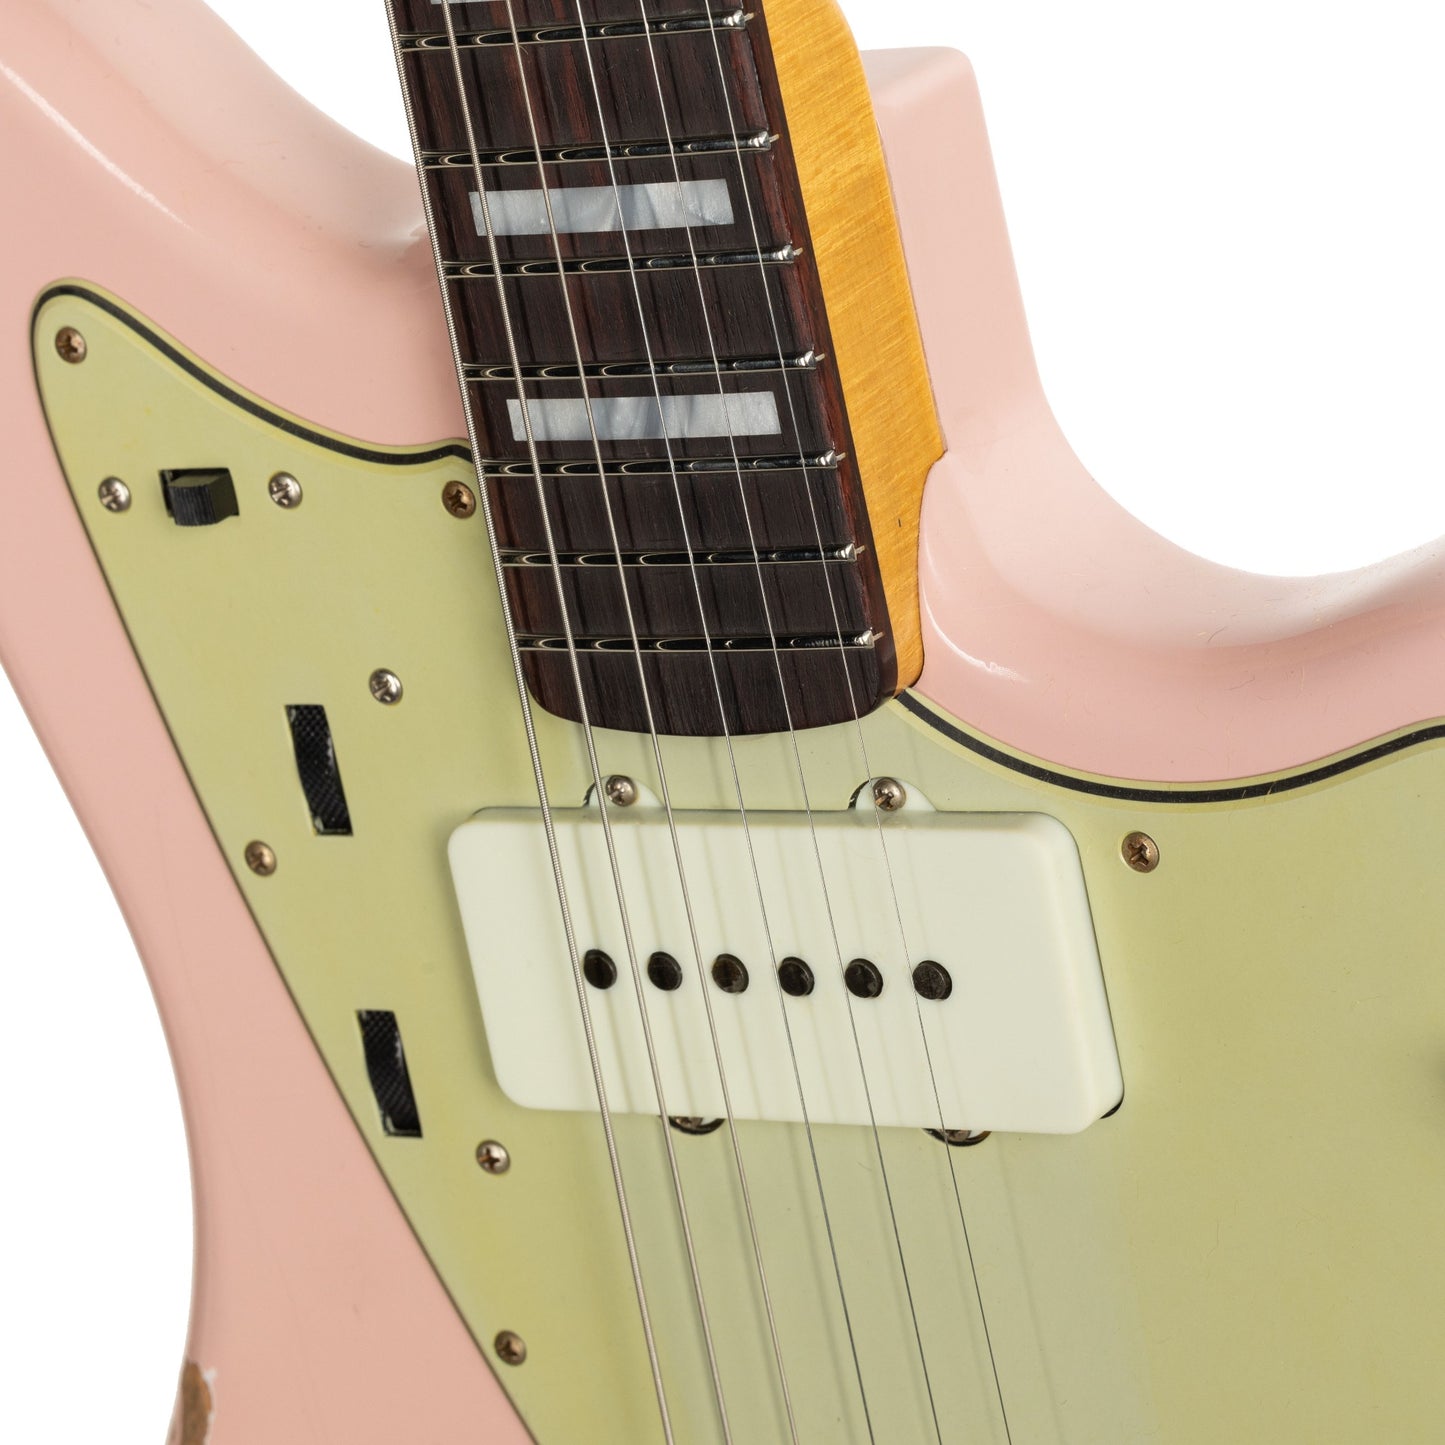 Fender Custom Shop 62 Jazzmaster Relic PHC Electric Guitar - Shell Pink